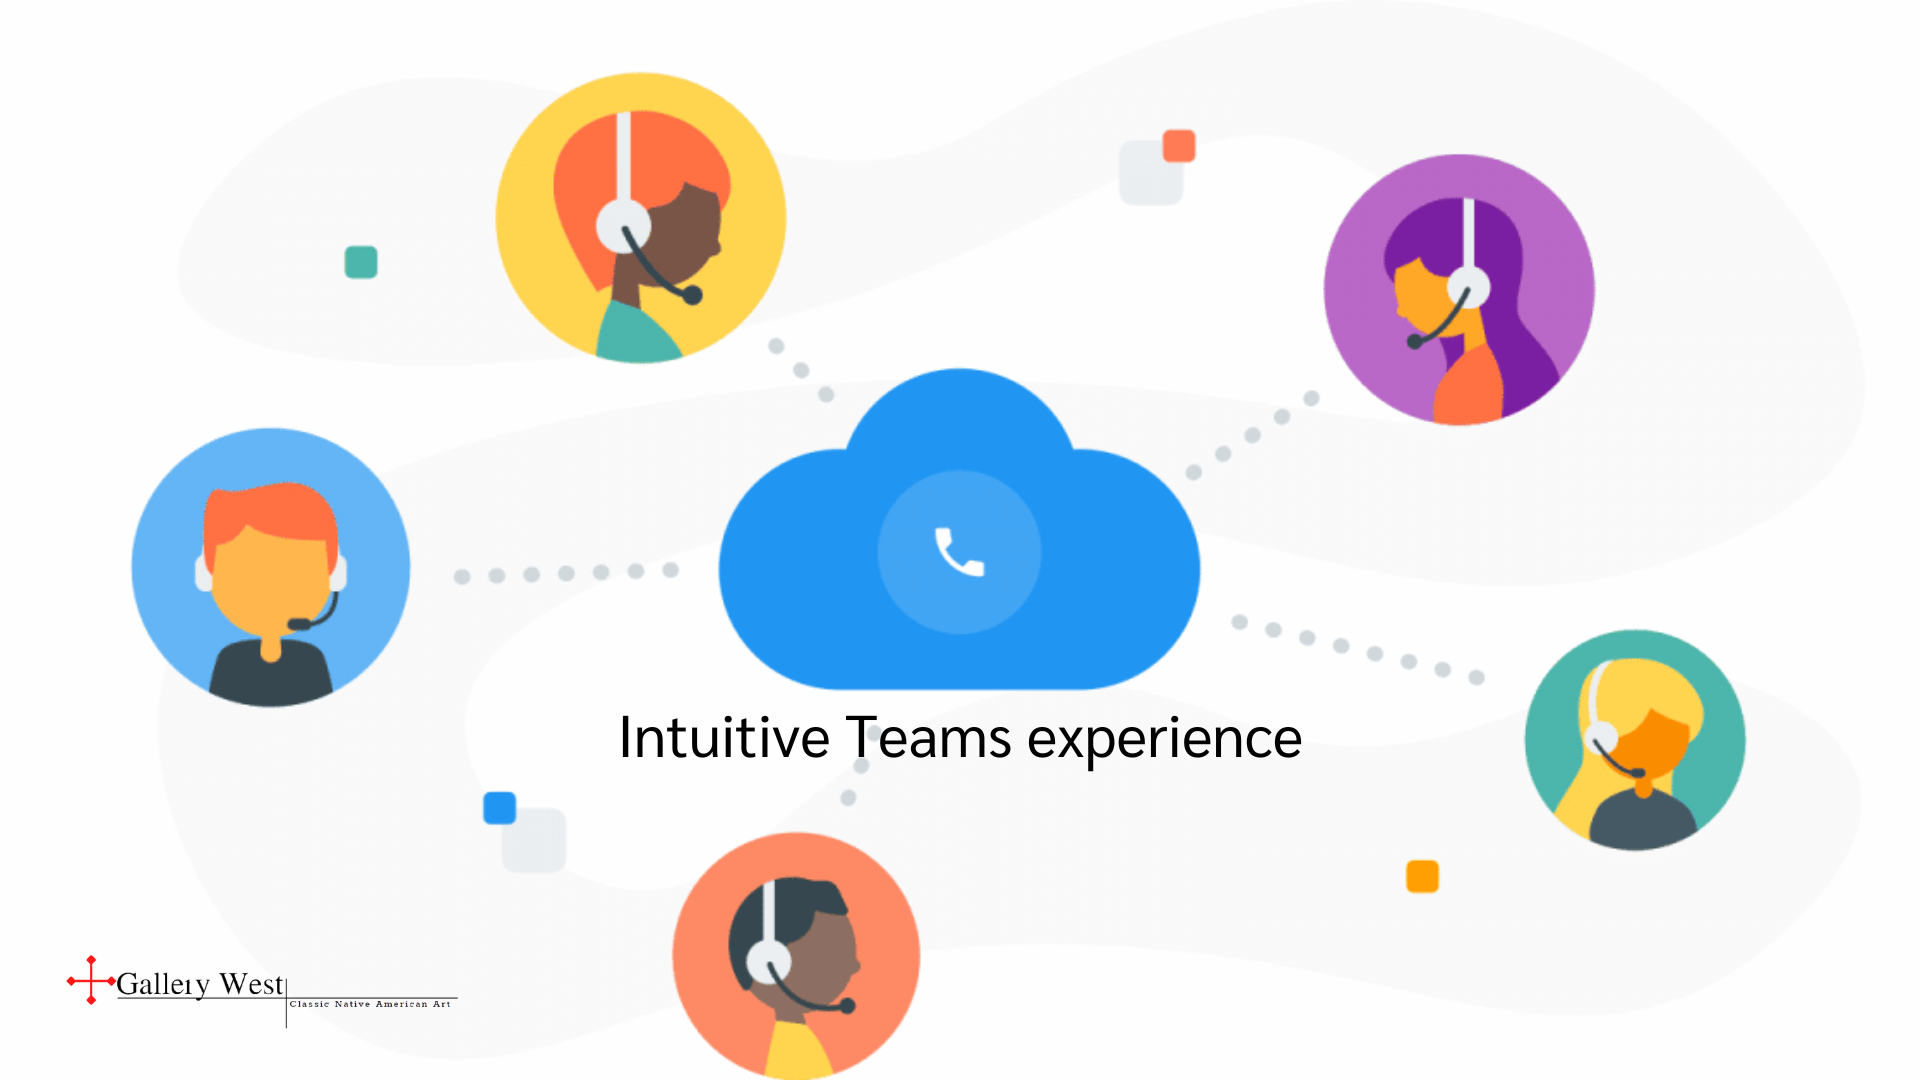 Intuitive Teams experience